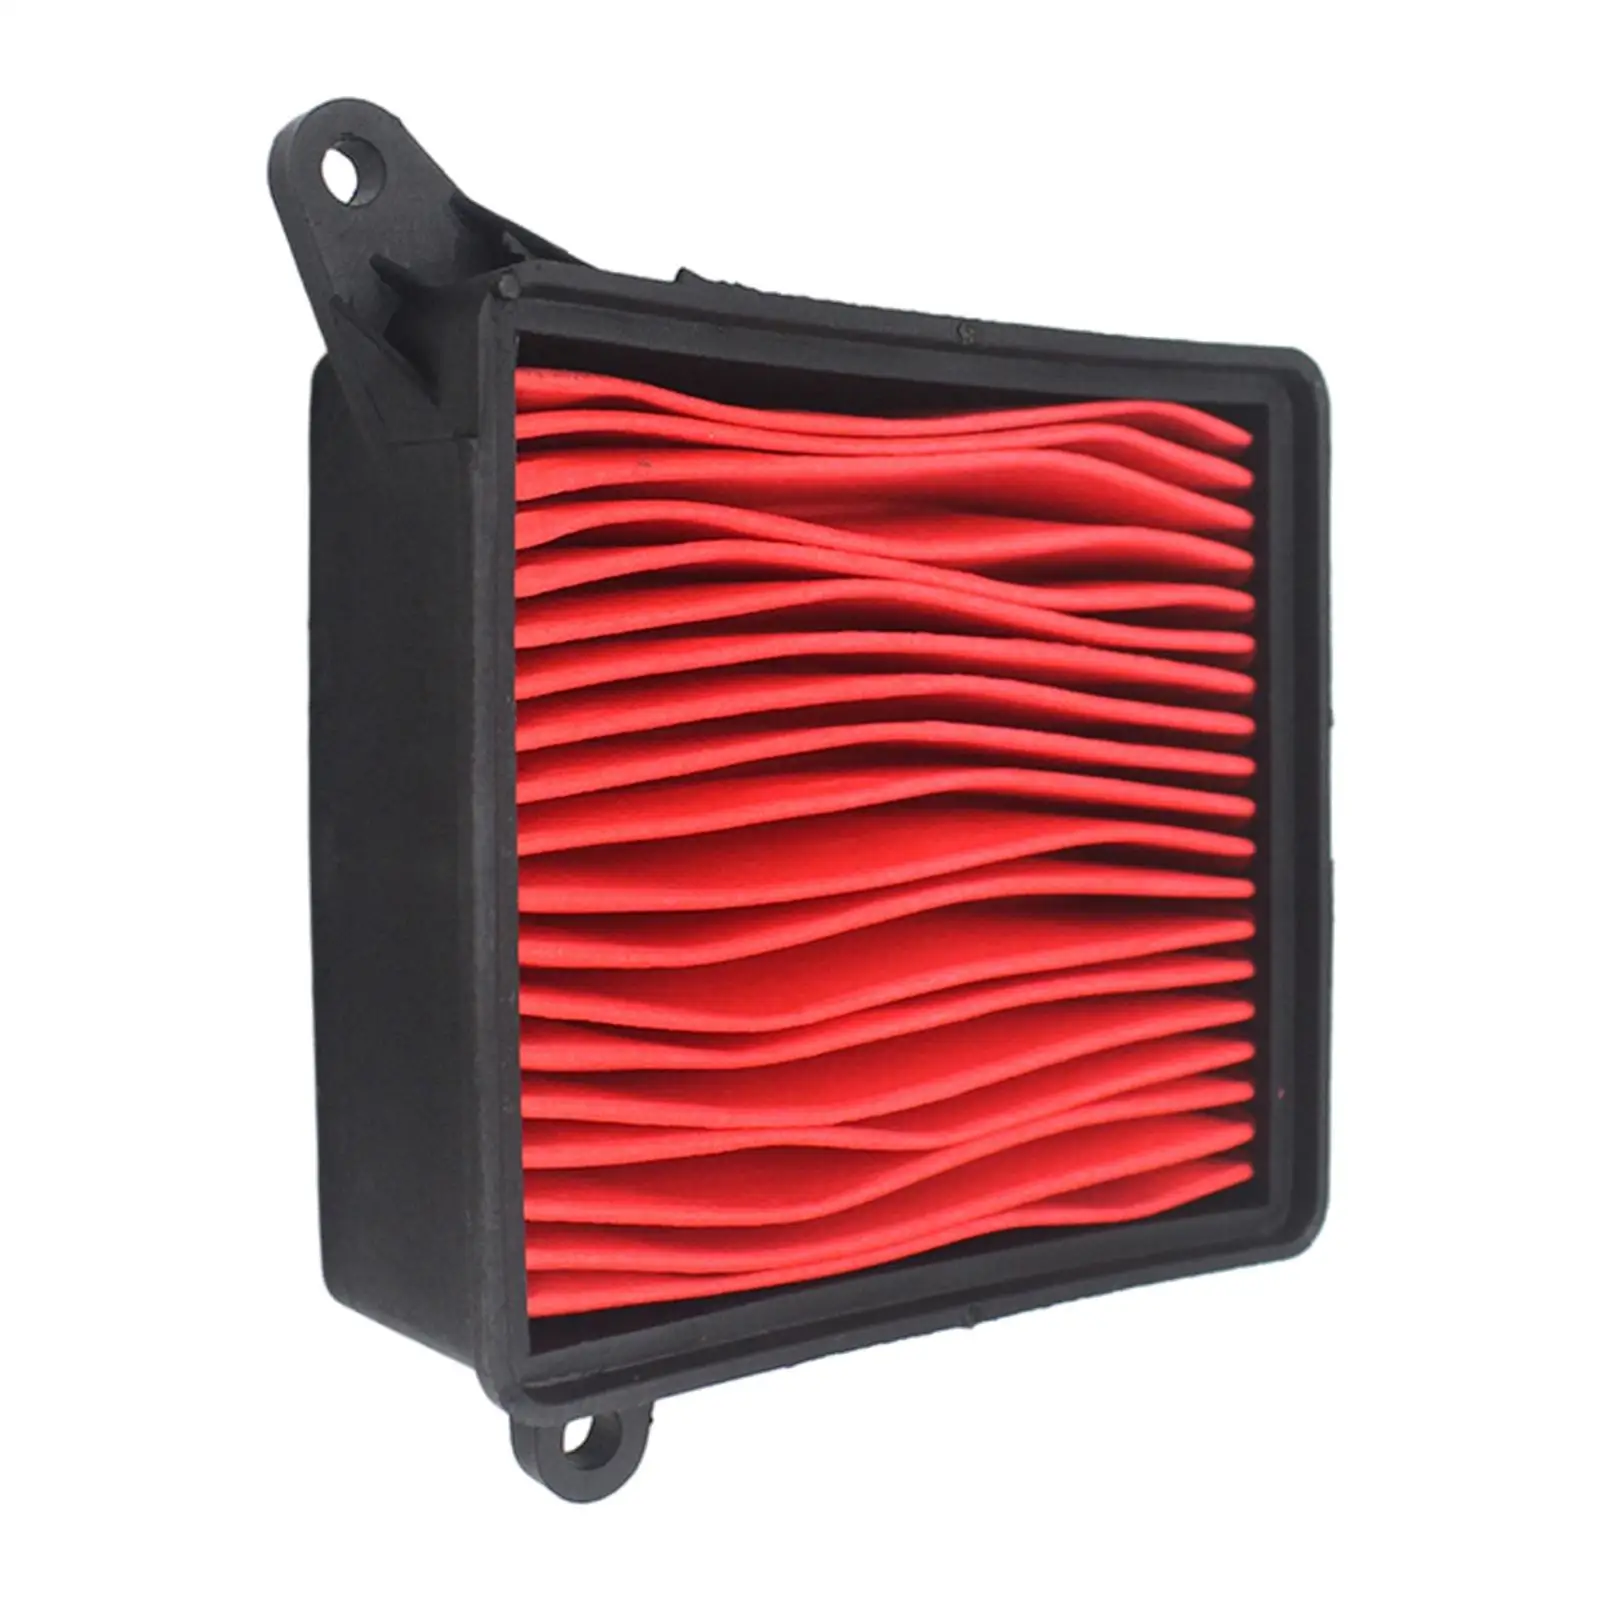 Motorcycle Air Filter Cleaner for Kymco Agility 125R 125cc, Lightweight